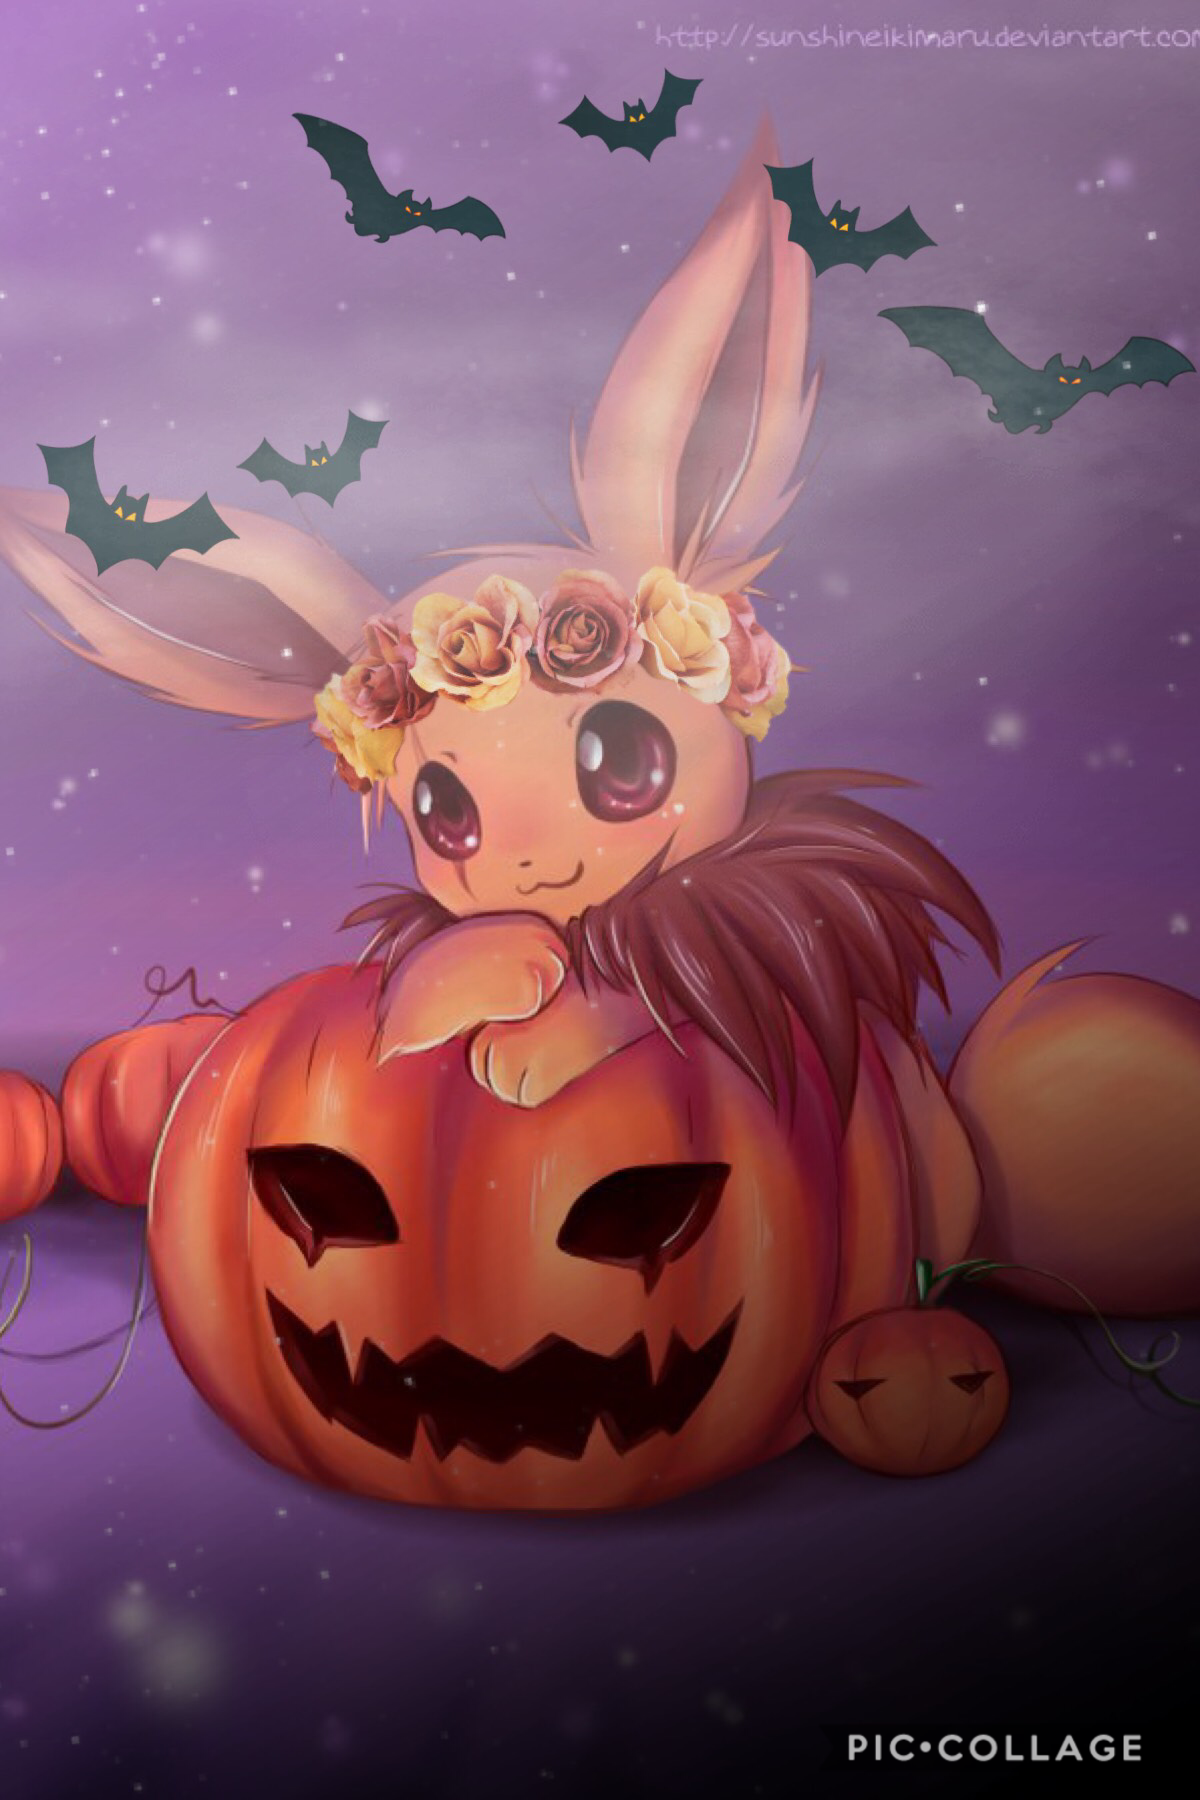 Halloween is coming up so I’d be happy to take some scary edits or Halloween themed! =D 